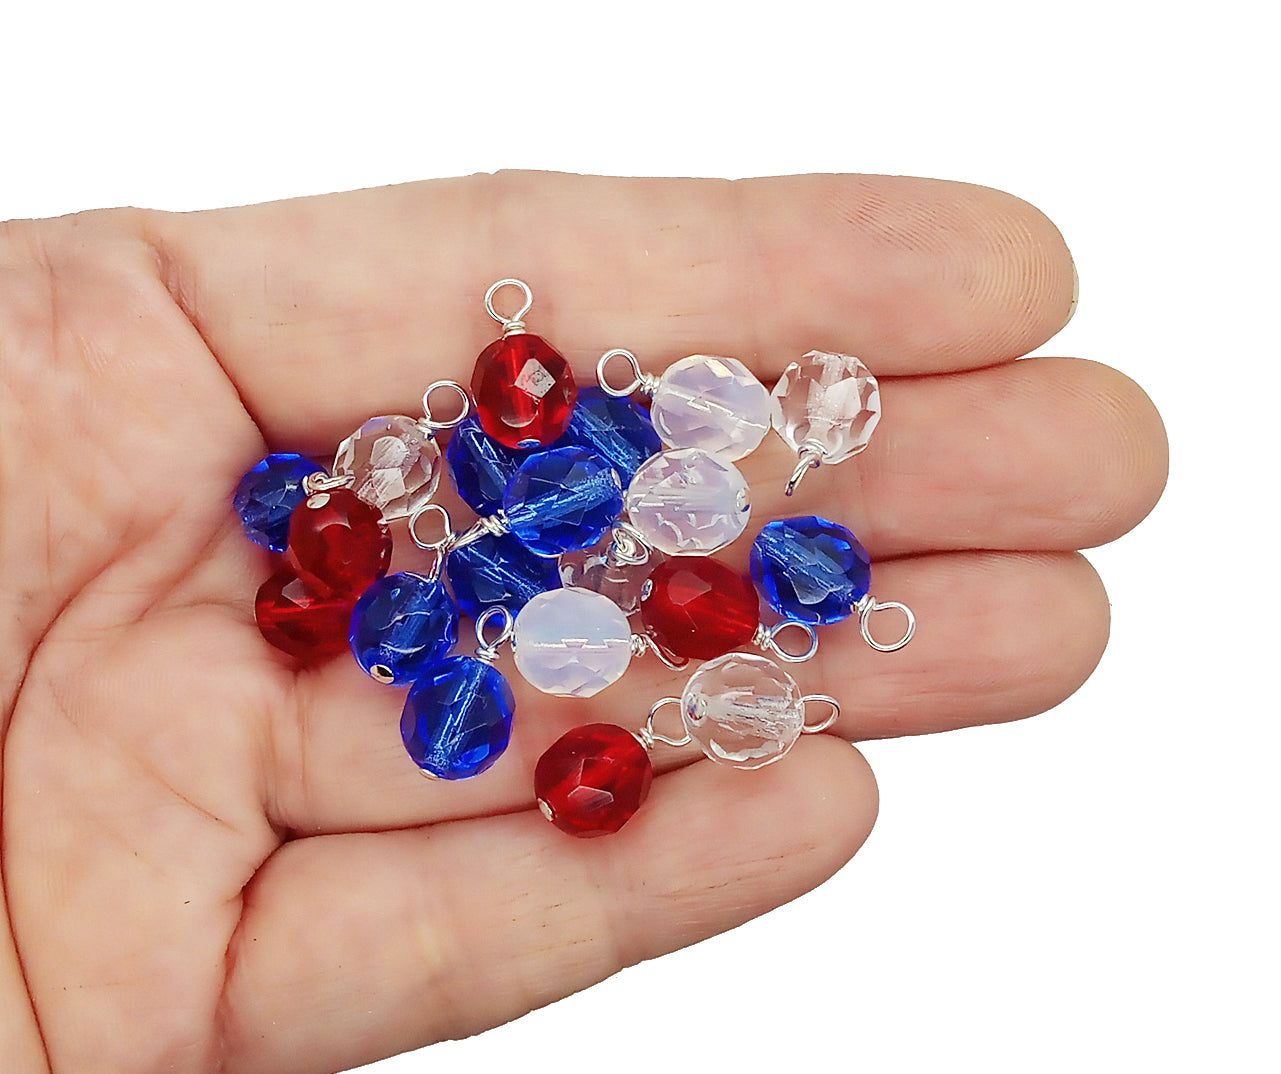 10 pc Colorful Dangles, 8mm Fire-Polished Bead Charms, Patriotic Mix